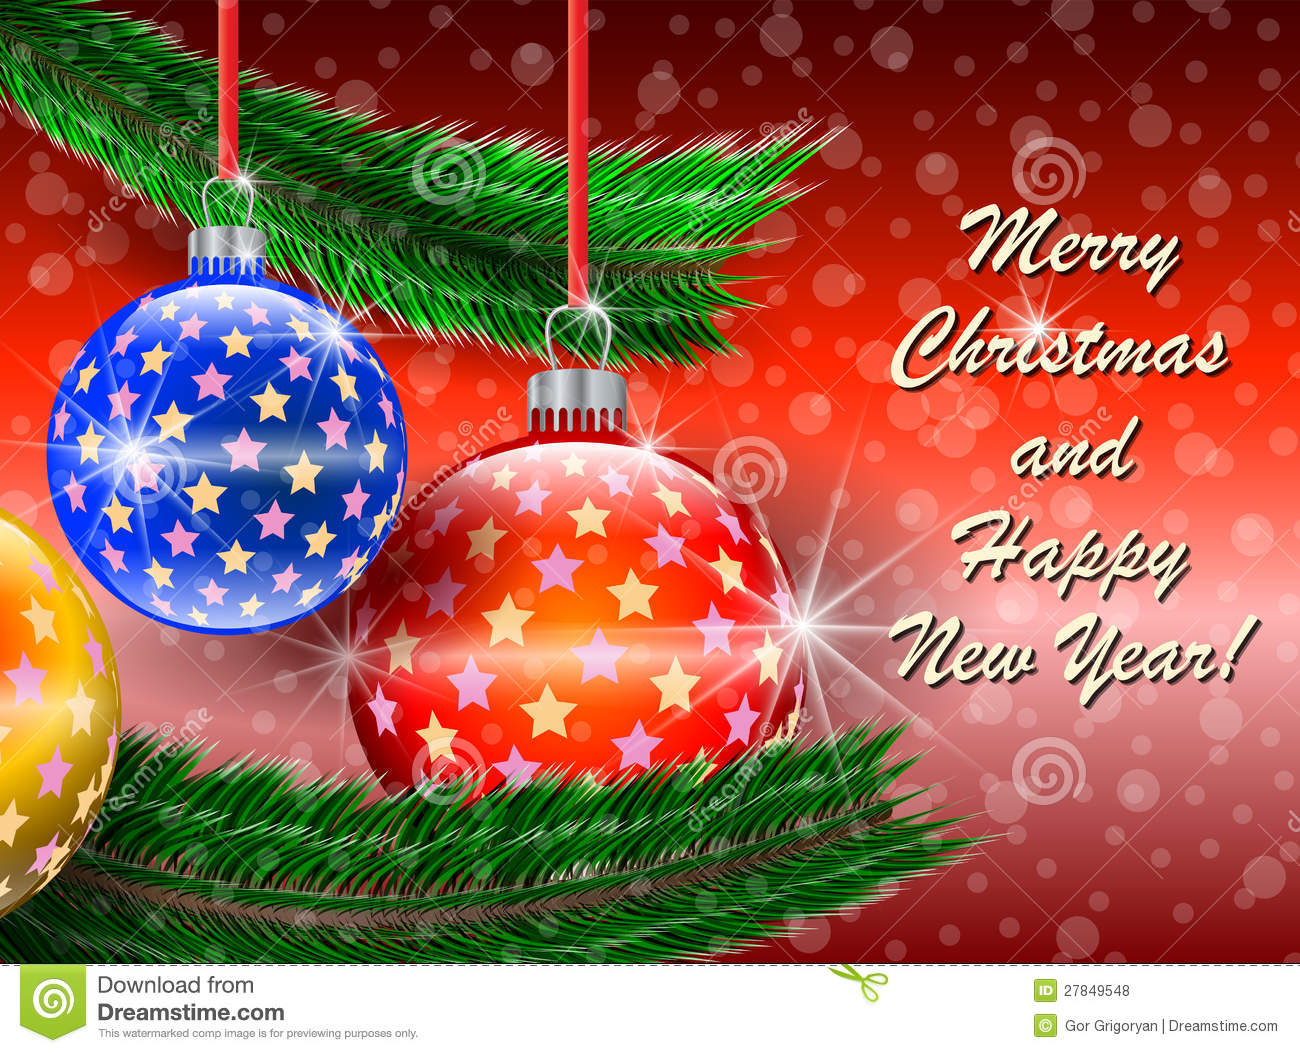 500+ Merry Christmas And Happy New Year 2021 Wishes